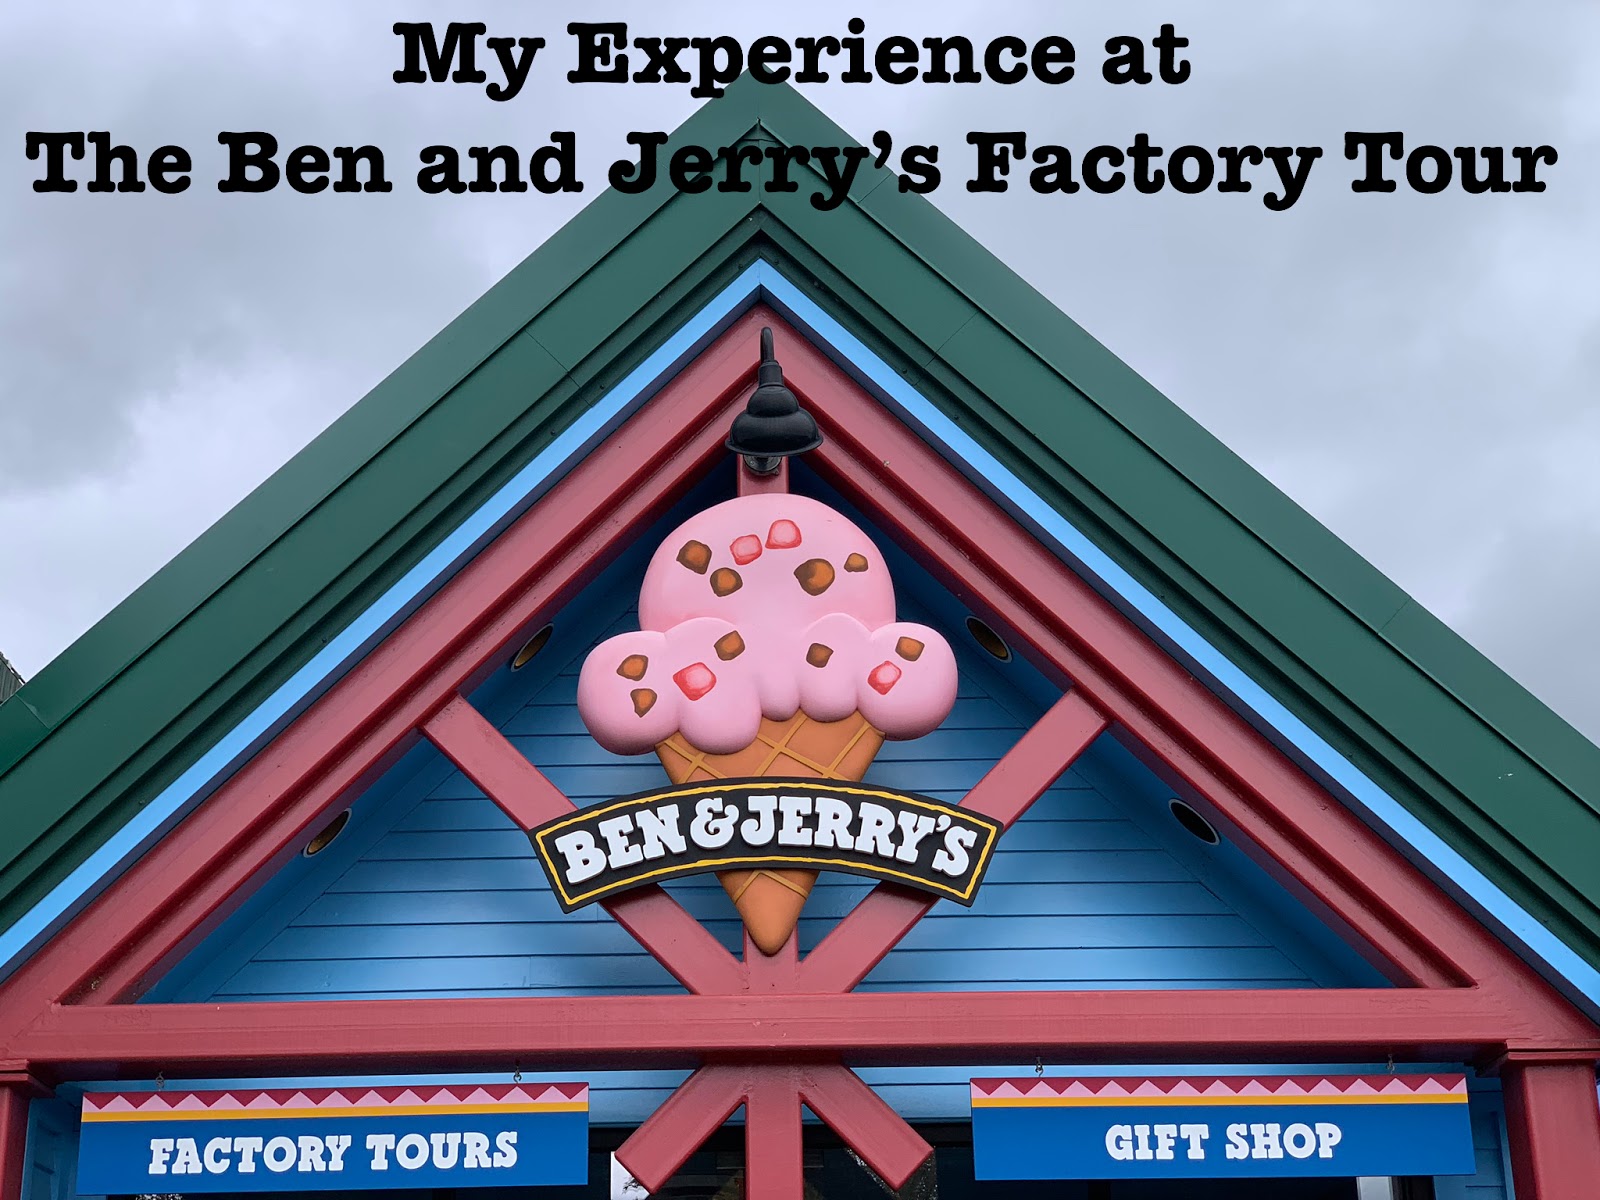 Deirdre sullivan is an interior design expert and features writer who specializes in home improvement as well as design. My Experience At The Ben And Jerry S Factory Tour A Great Big Beautiful Blog